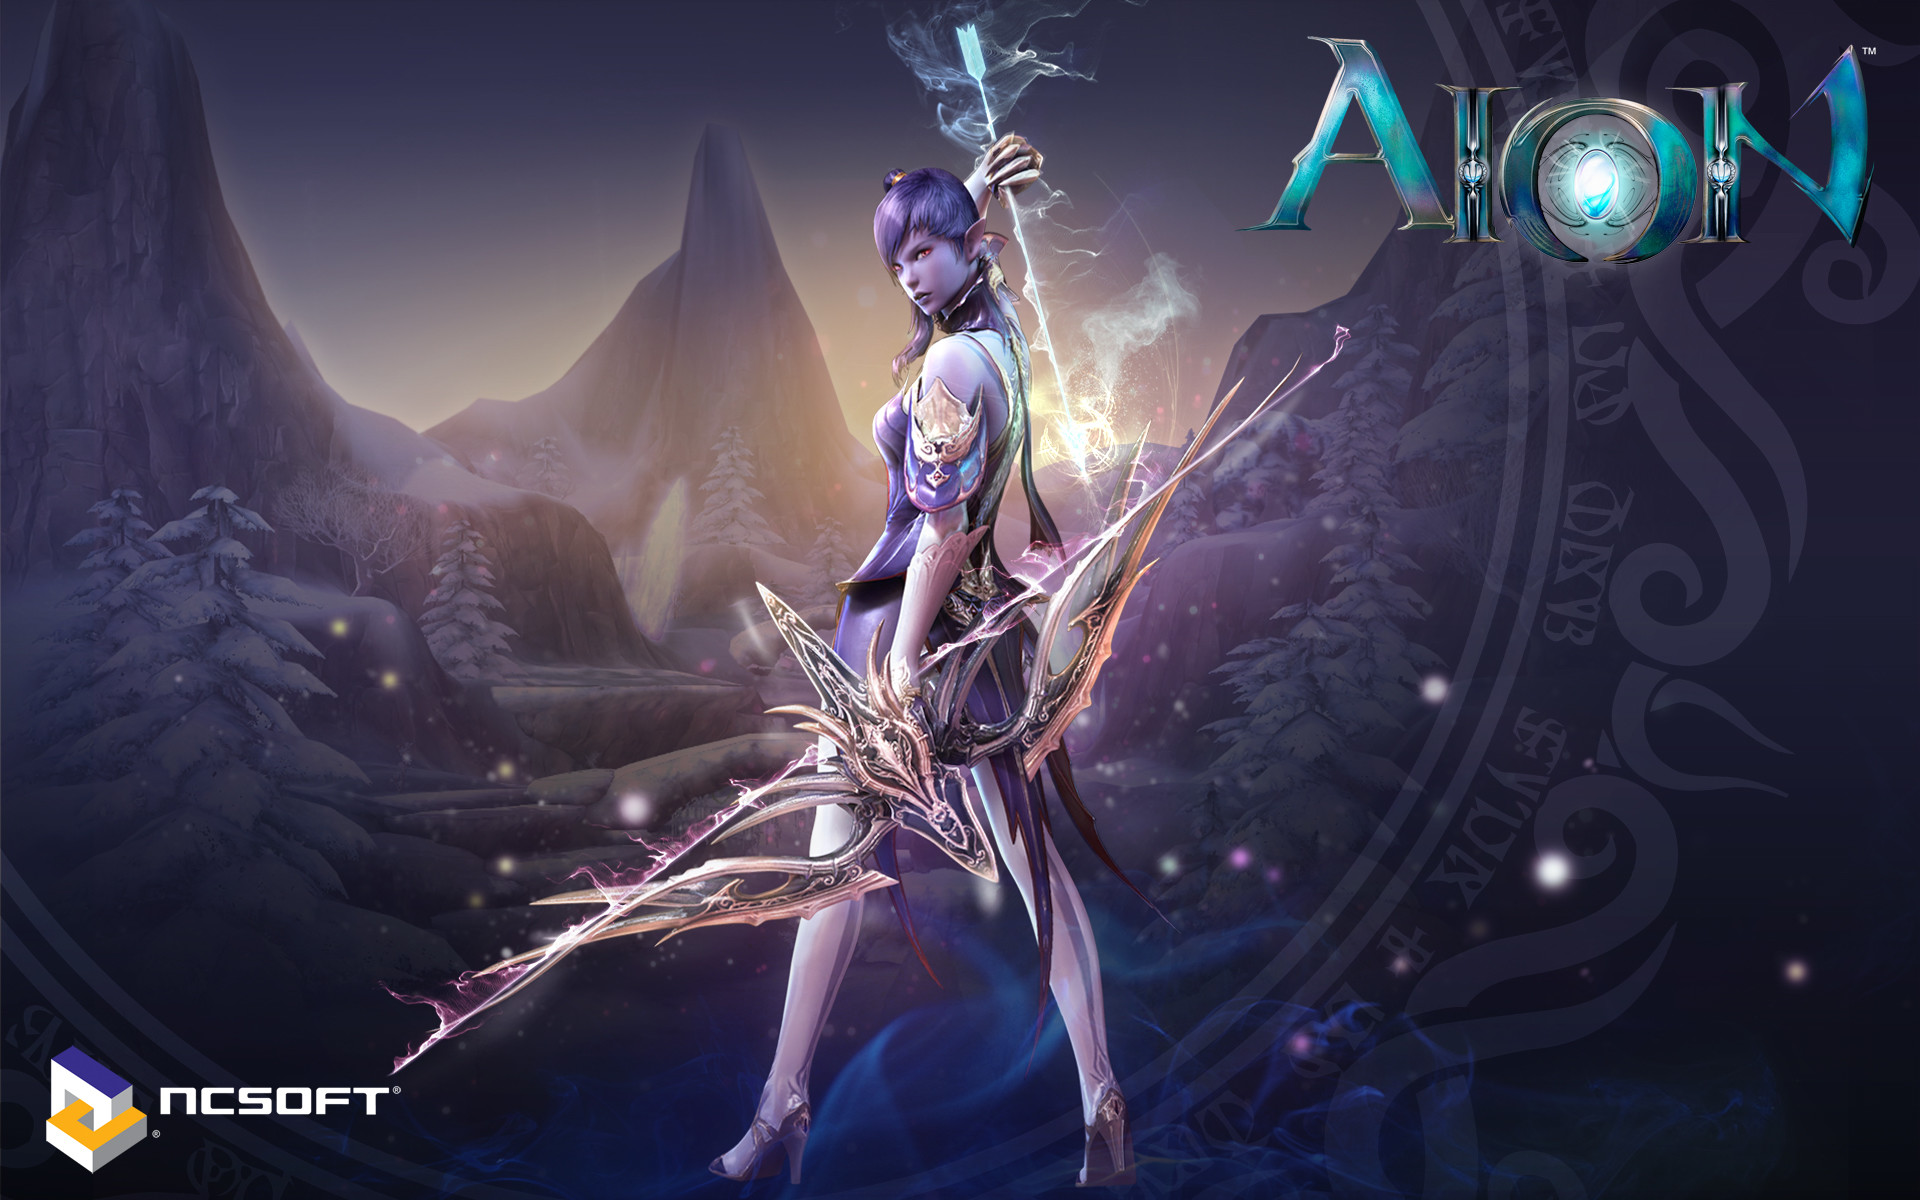 1920x1200 Asmodian: Ranger Aion The Tower of Eternity